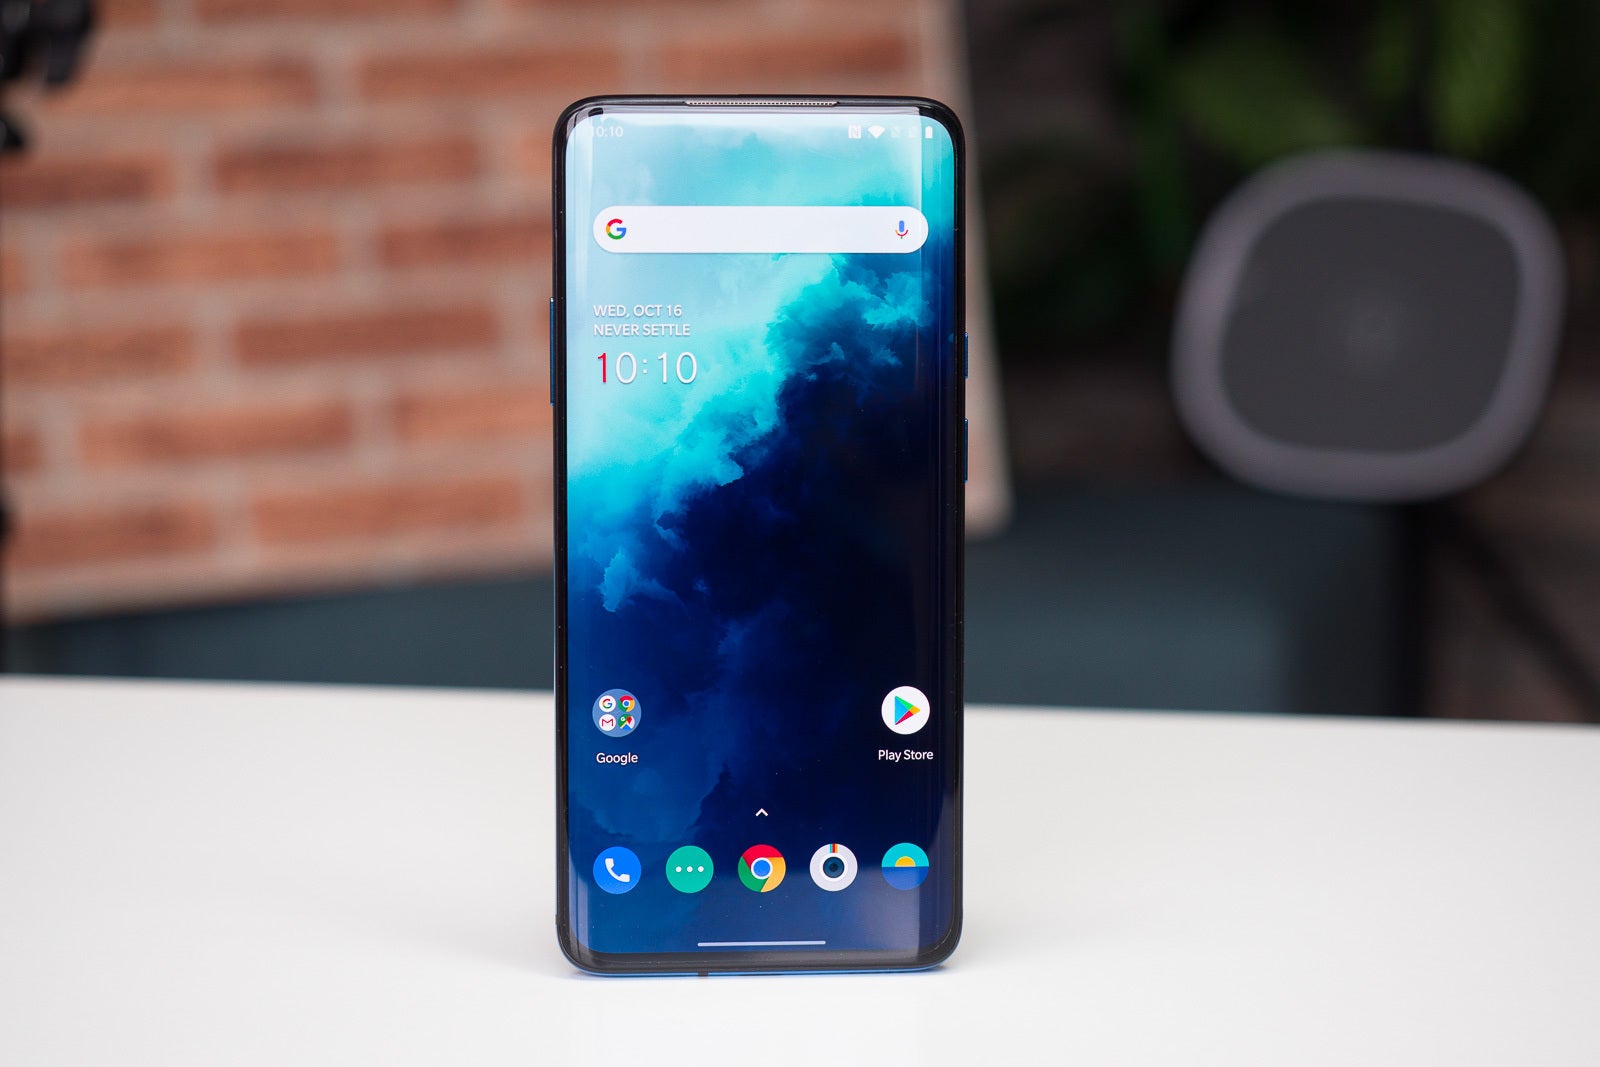 The OnePlus 7T Pro is receiving a patch to kill bugs on Oxygen OS 11.0.1.1 - Camera fixes, May security patch, and more are available now for OnePlus 7 series phones